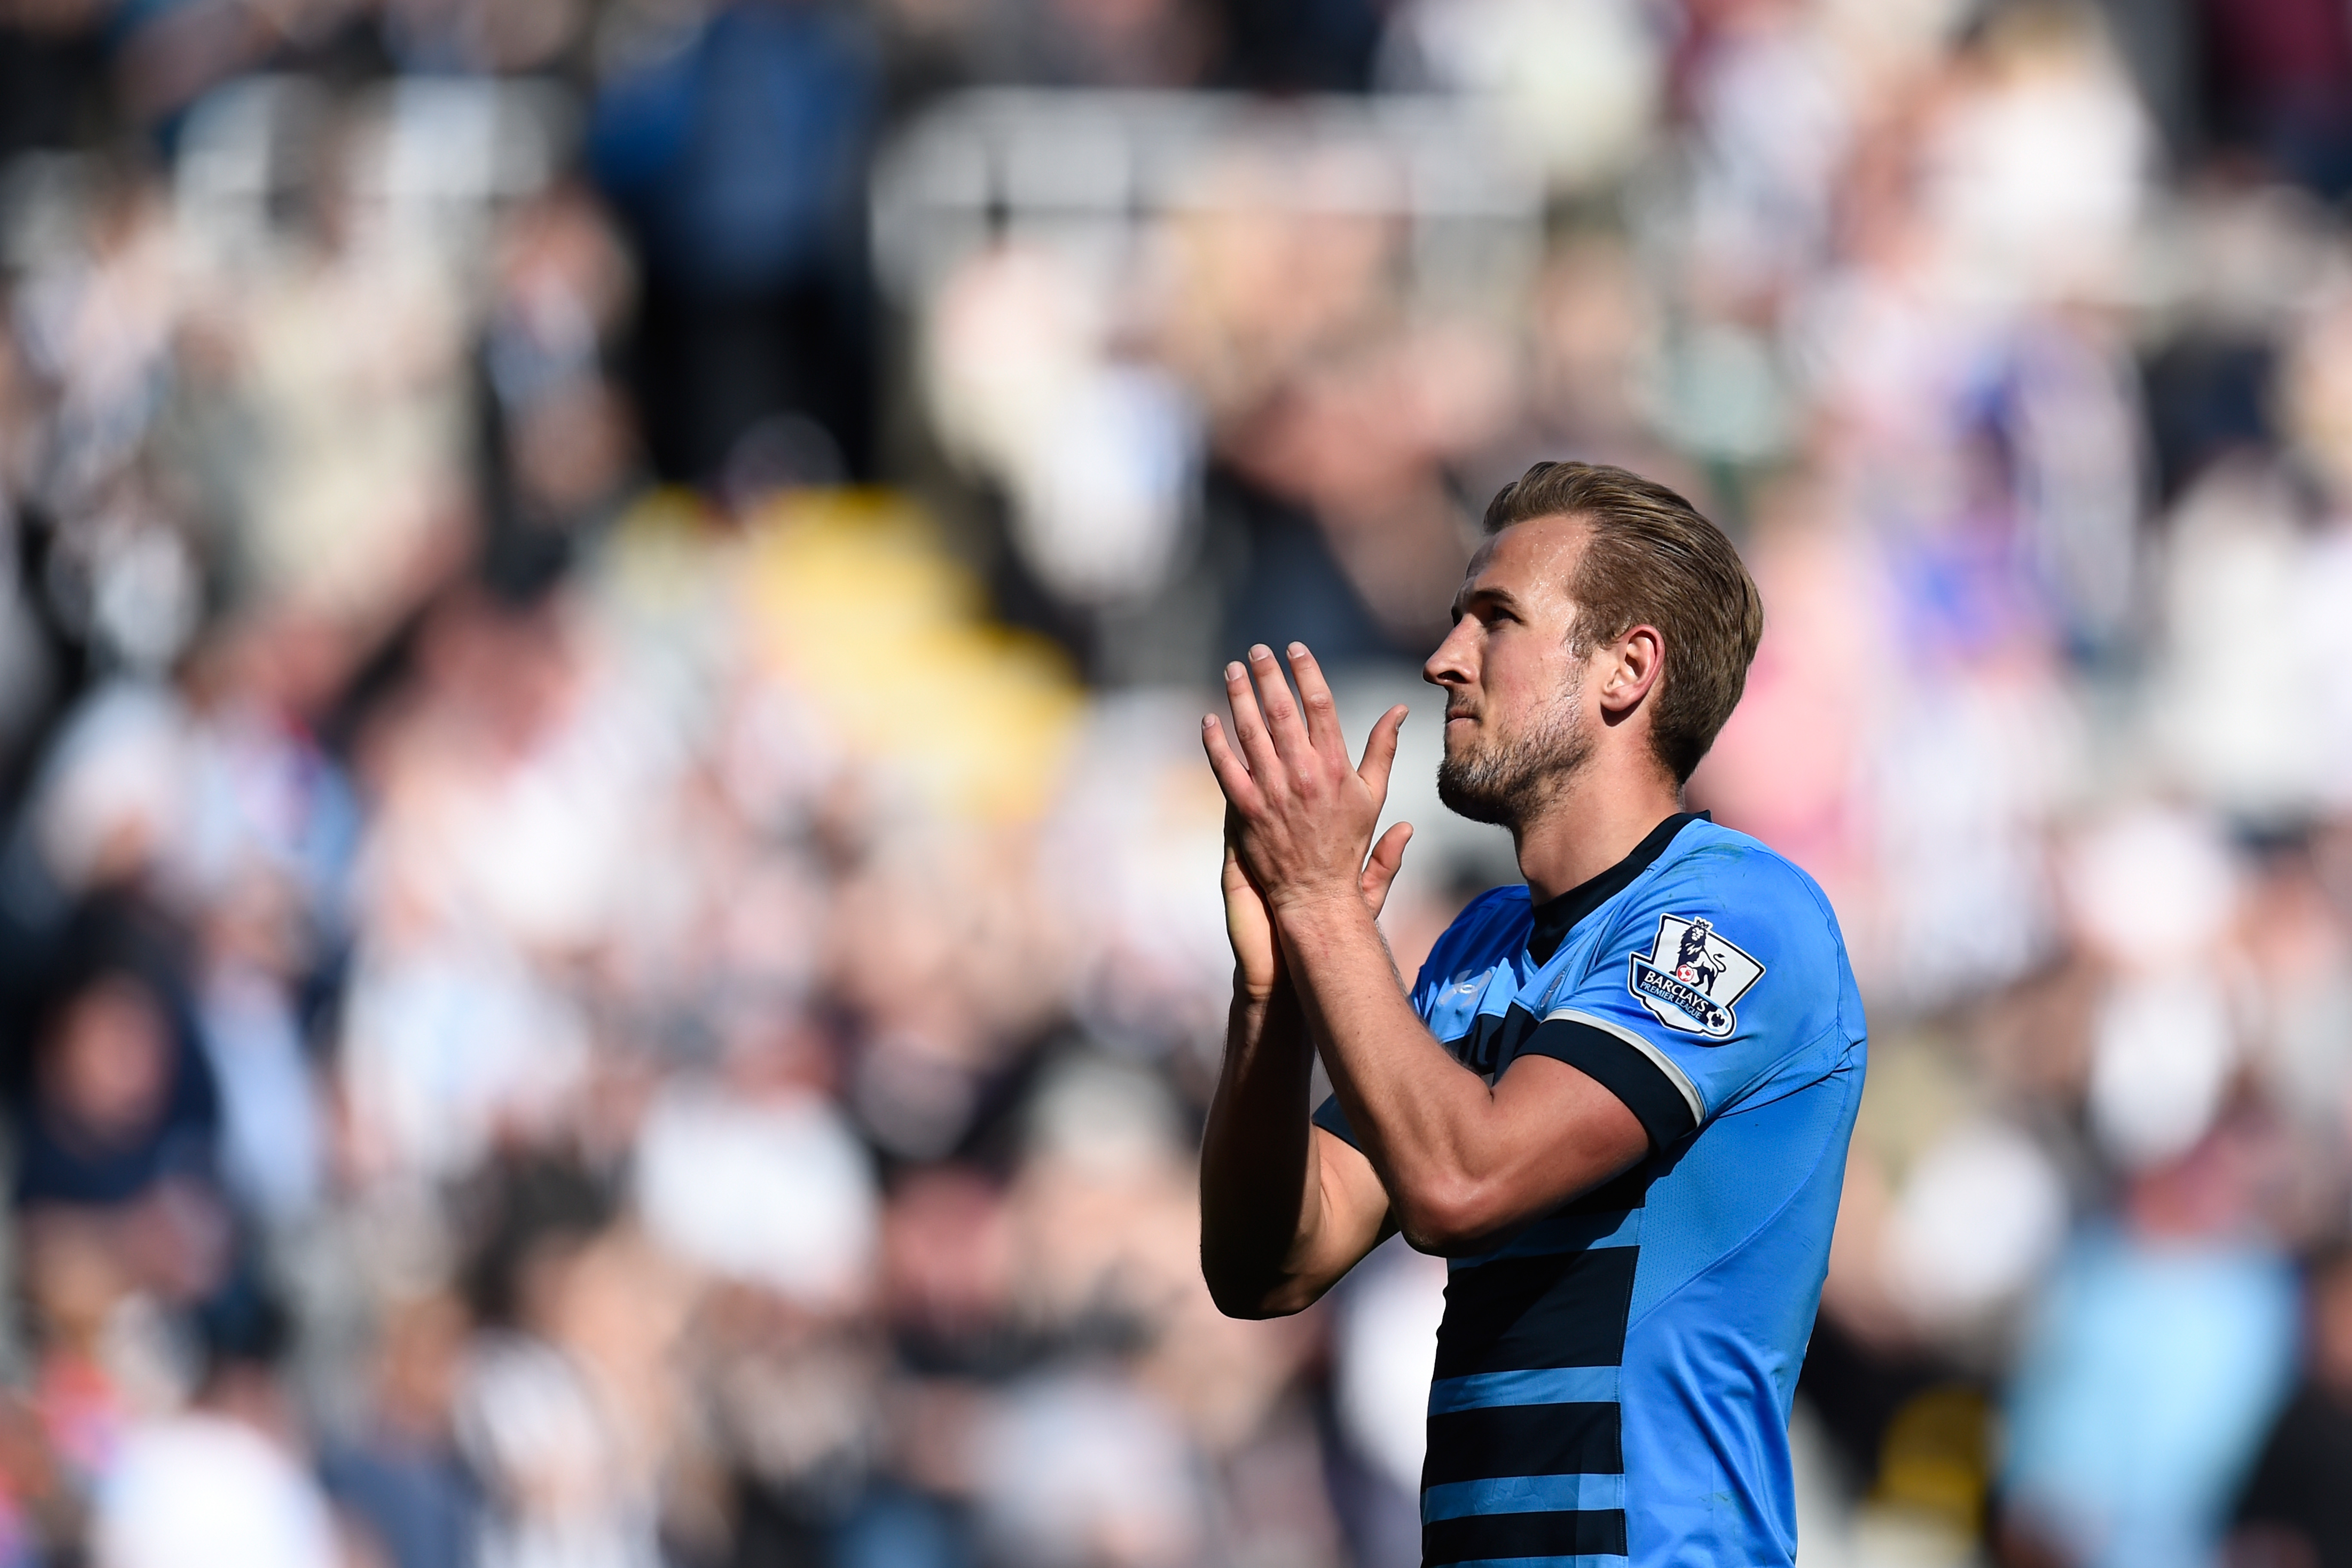 NEWCASTLE UPON TYNE, ENGLAND - MAY 15: Harry Kane of Tottenham Hotspur applauds the fans after the Barclays Premier League match between Newcastle United and Tottenham Hotspur at St James' Park on May 15, 2016 in Newcastle, England.  (Photo by Stu Forster/Getty Images)